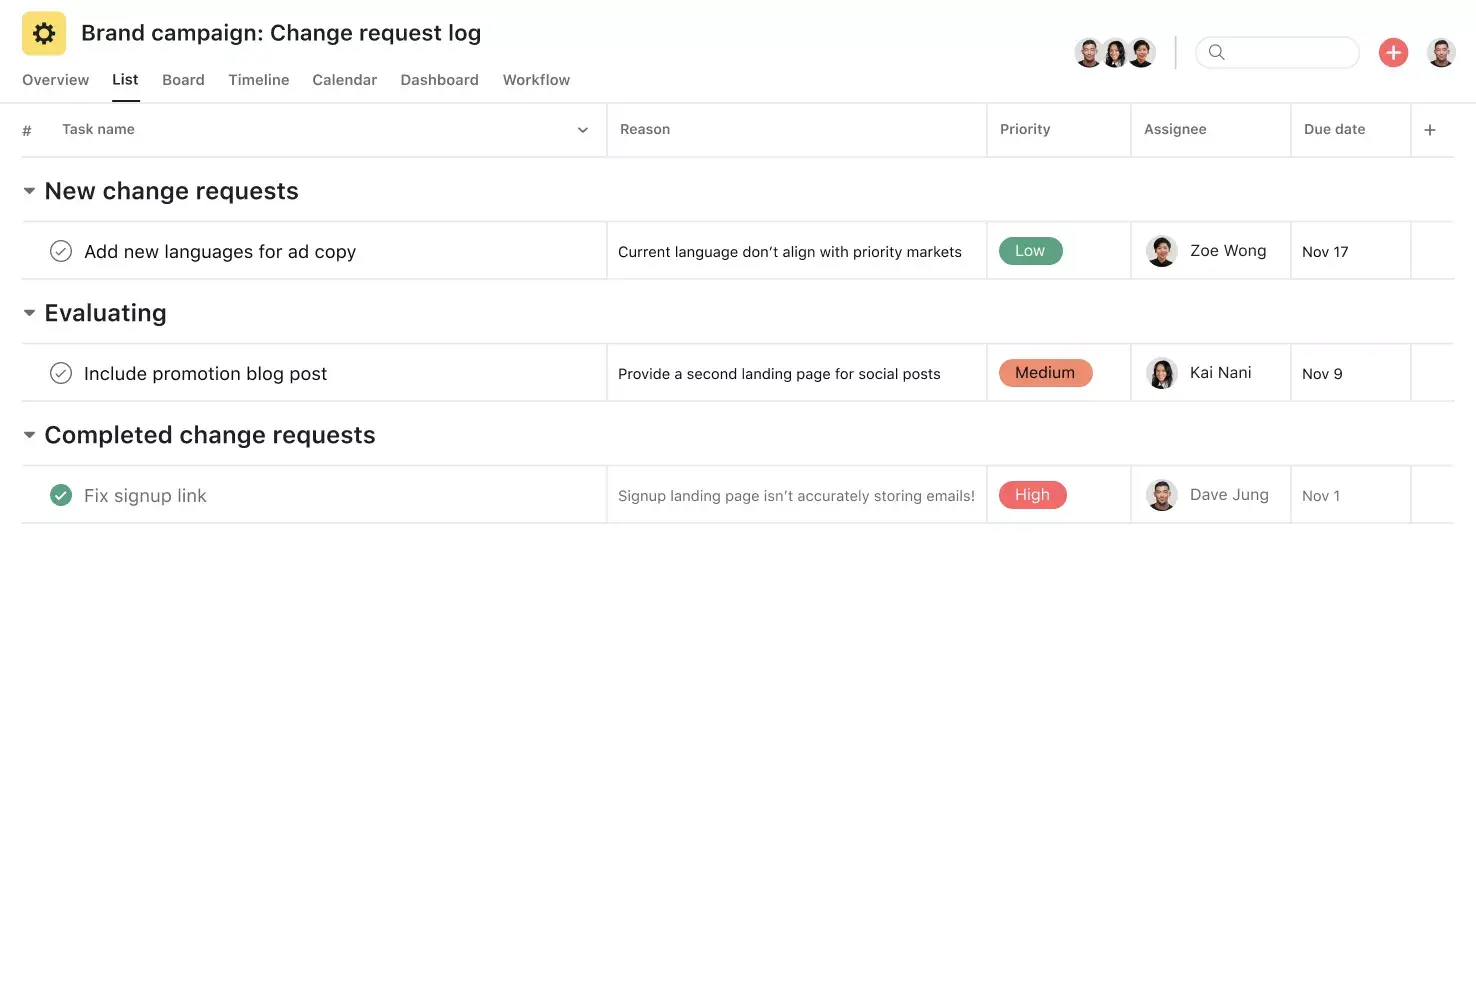 [product ui] Empty change request log template in Asana, spreadsheet-style project view (List)